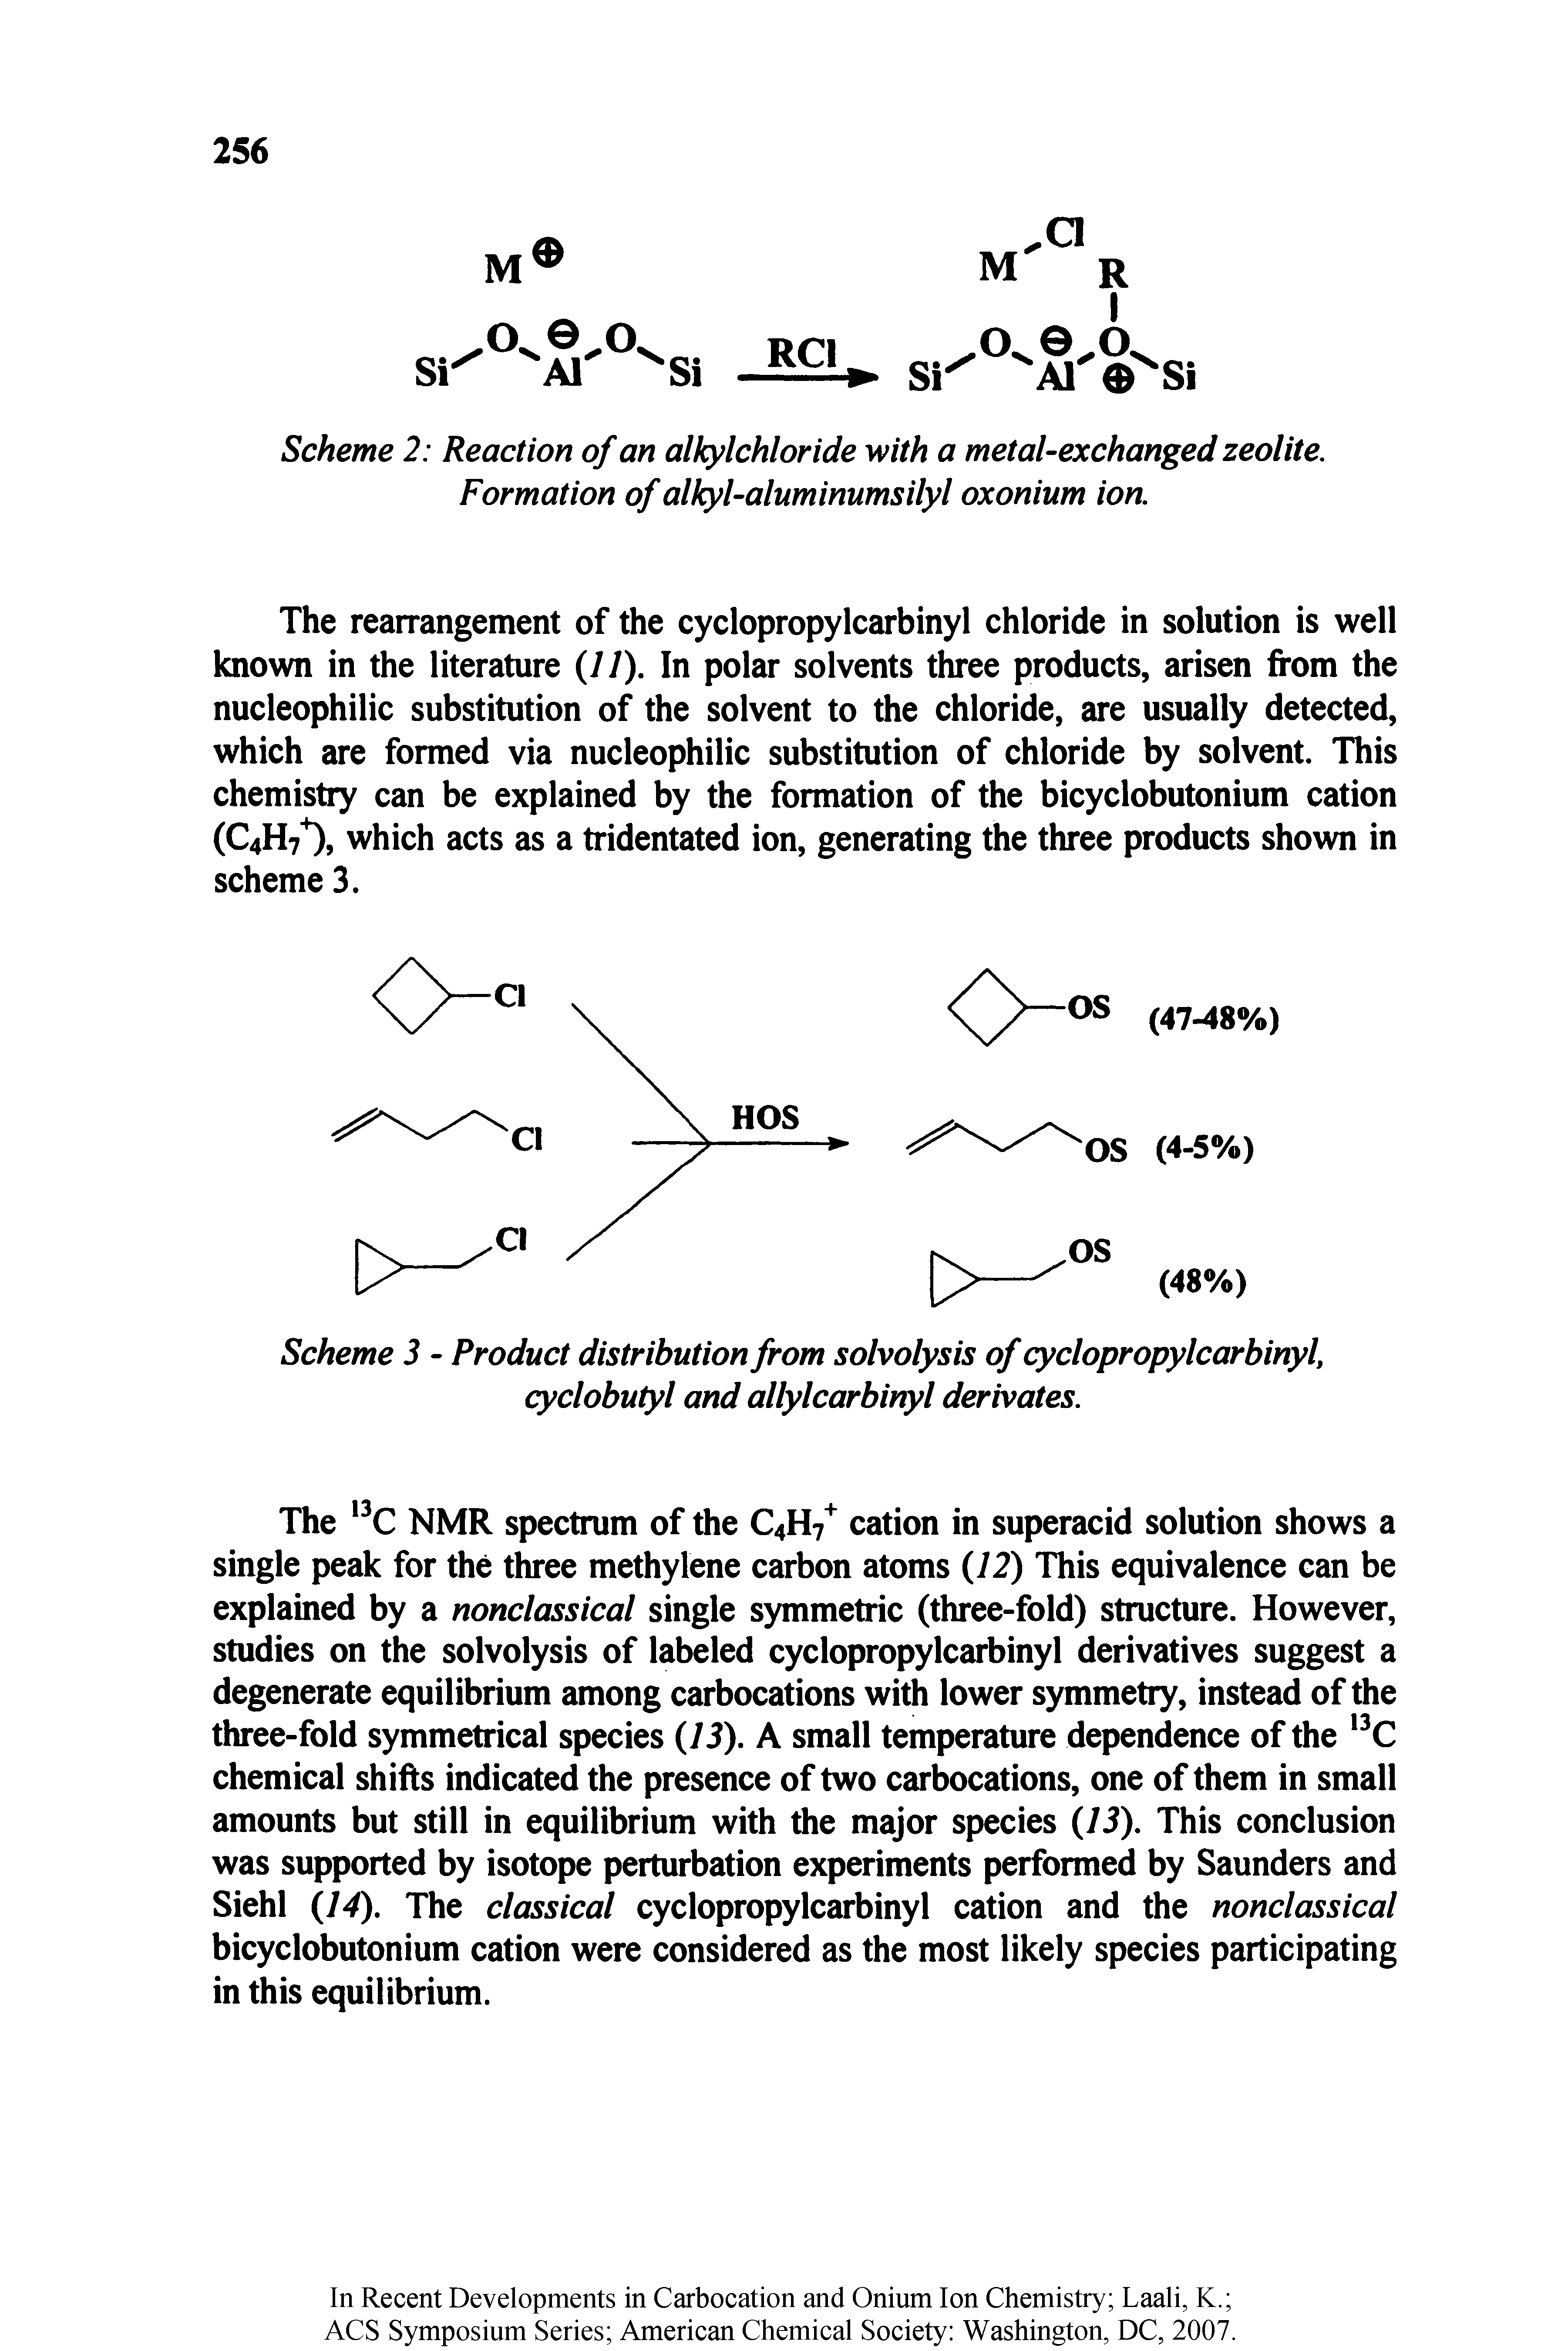 Scheme 2 Reaction of an alkylchloride with a metal-exchanged zeolite. Formation of alkyl-aluminumsilyl oxonium ion.